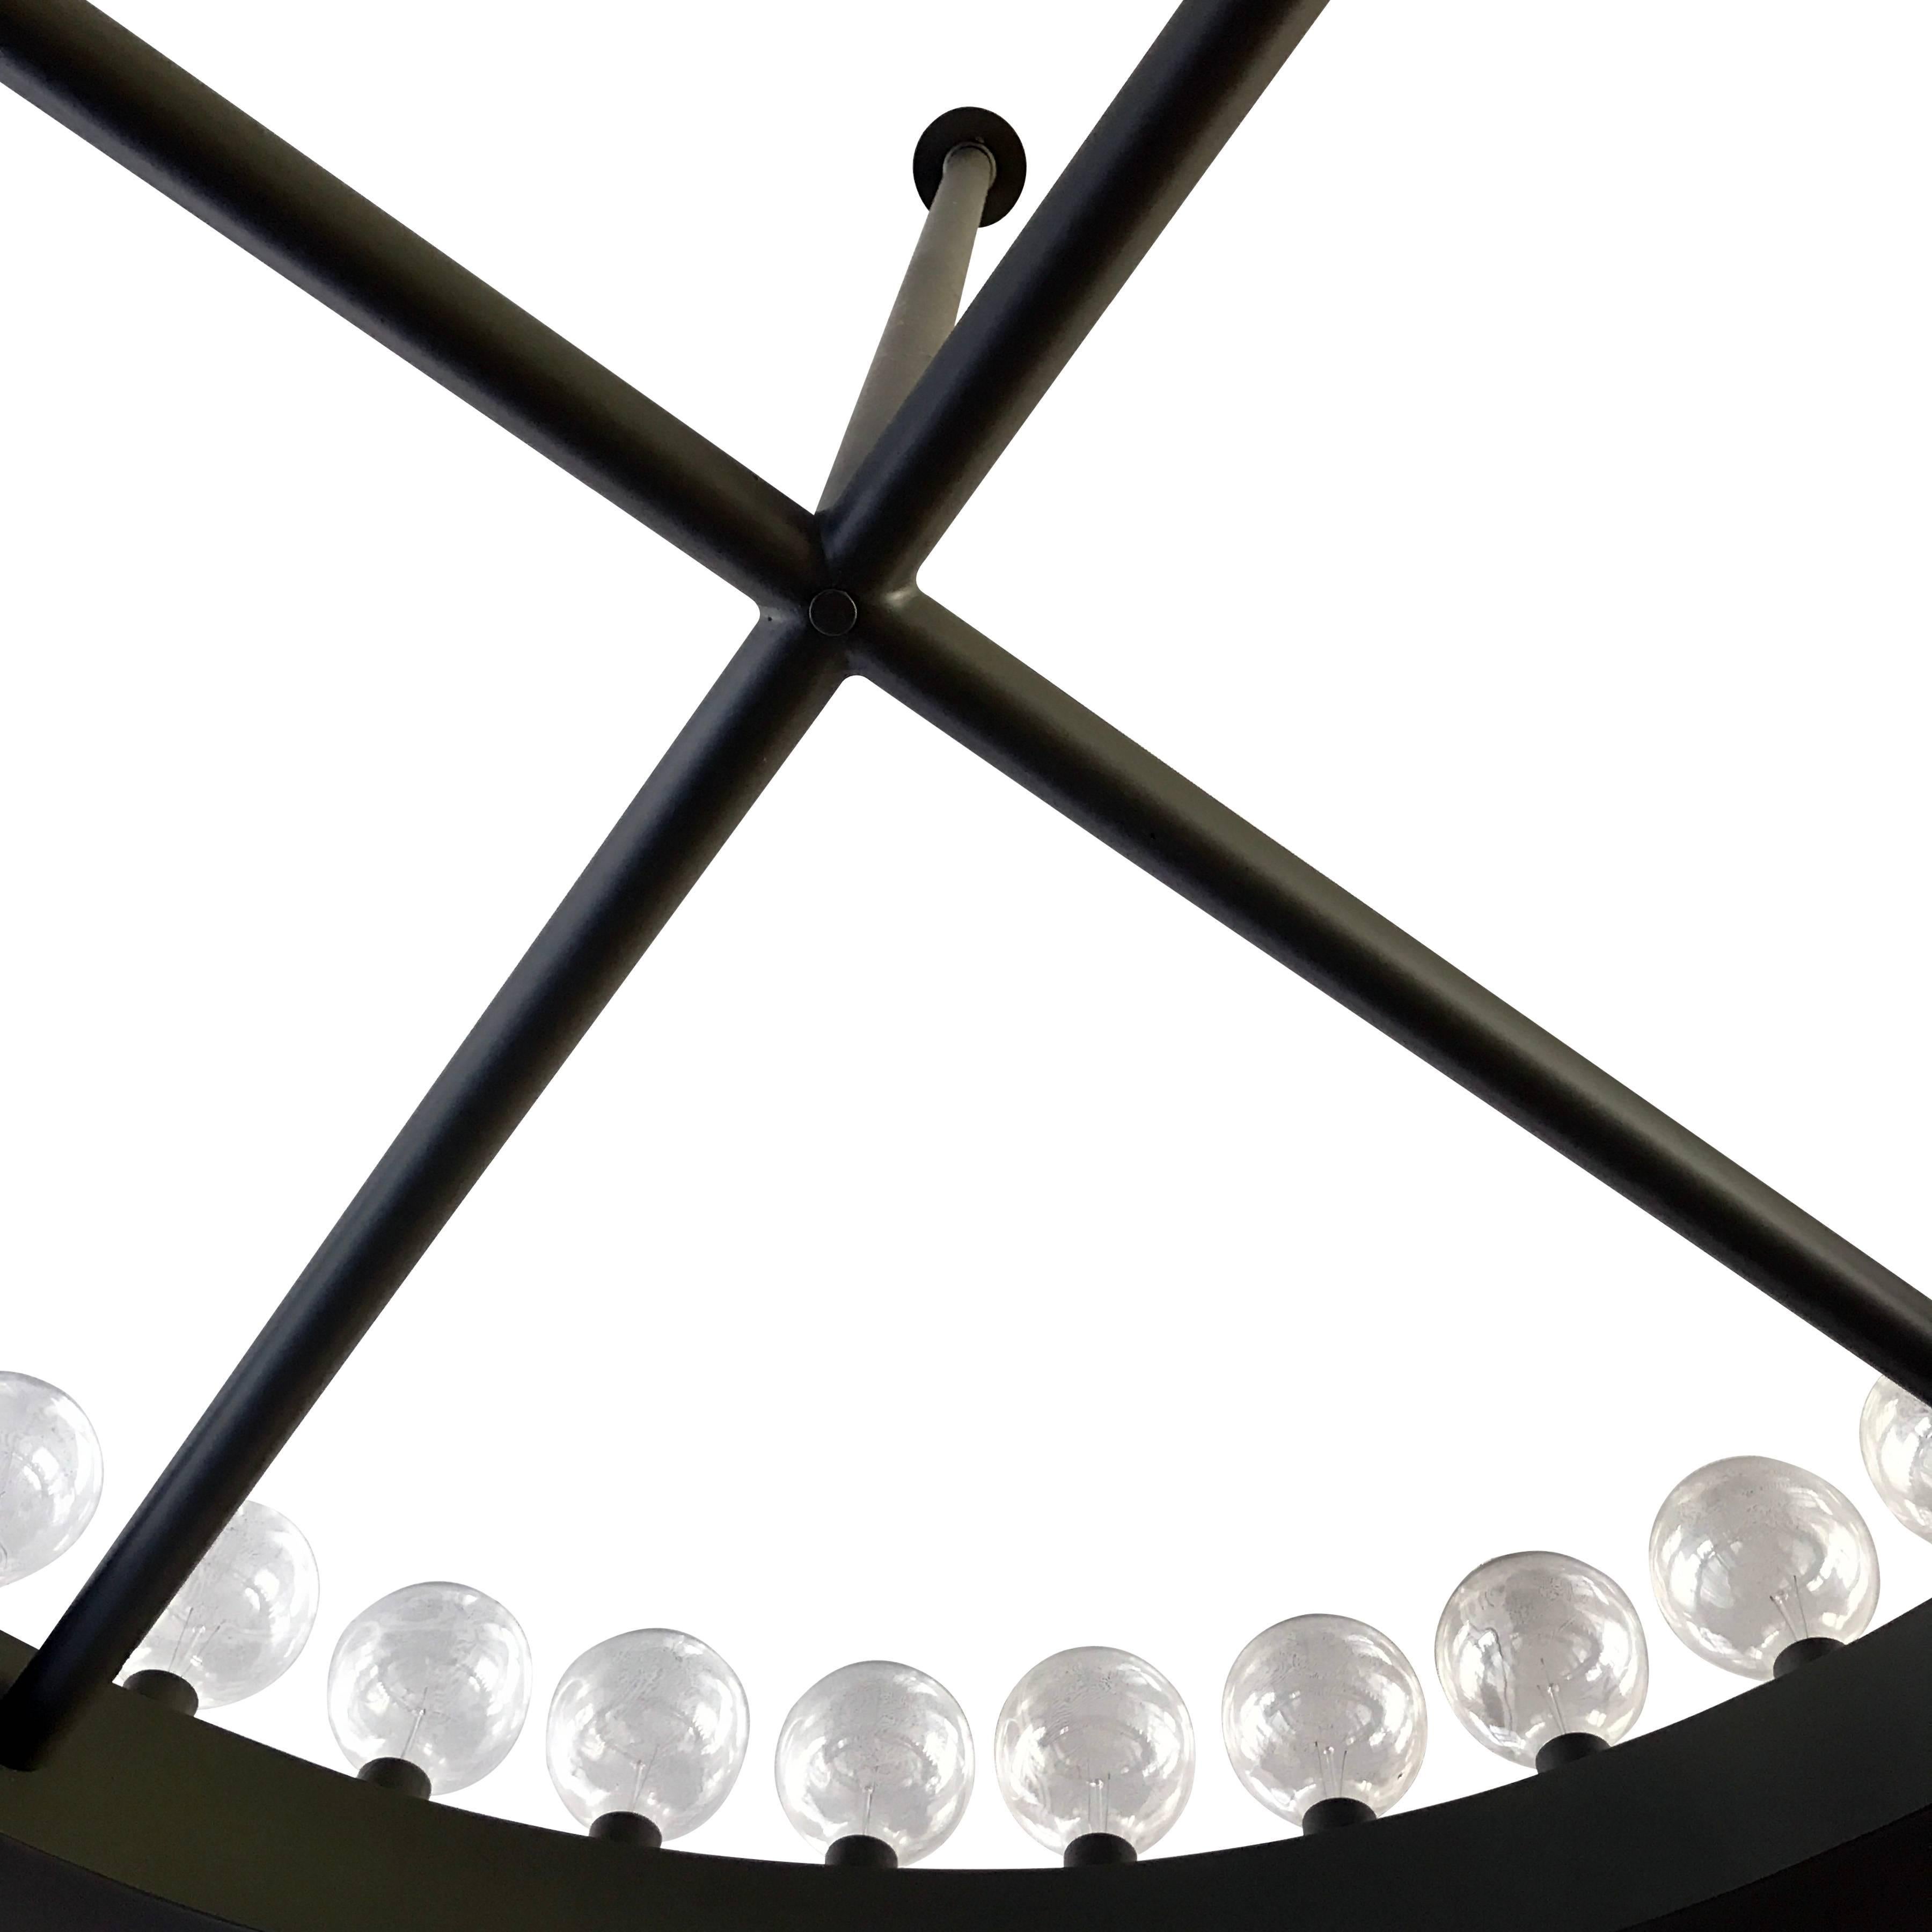 Large round chandeliers (7) in dark steel, each with 36 bulbs, from the original design of Kips Bay Towers by the office of I.M. Pei in 1963. These have been rewired and come with a Letter of Provenance from Kips Bay Towers stating that they were